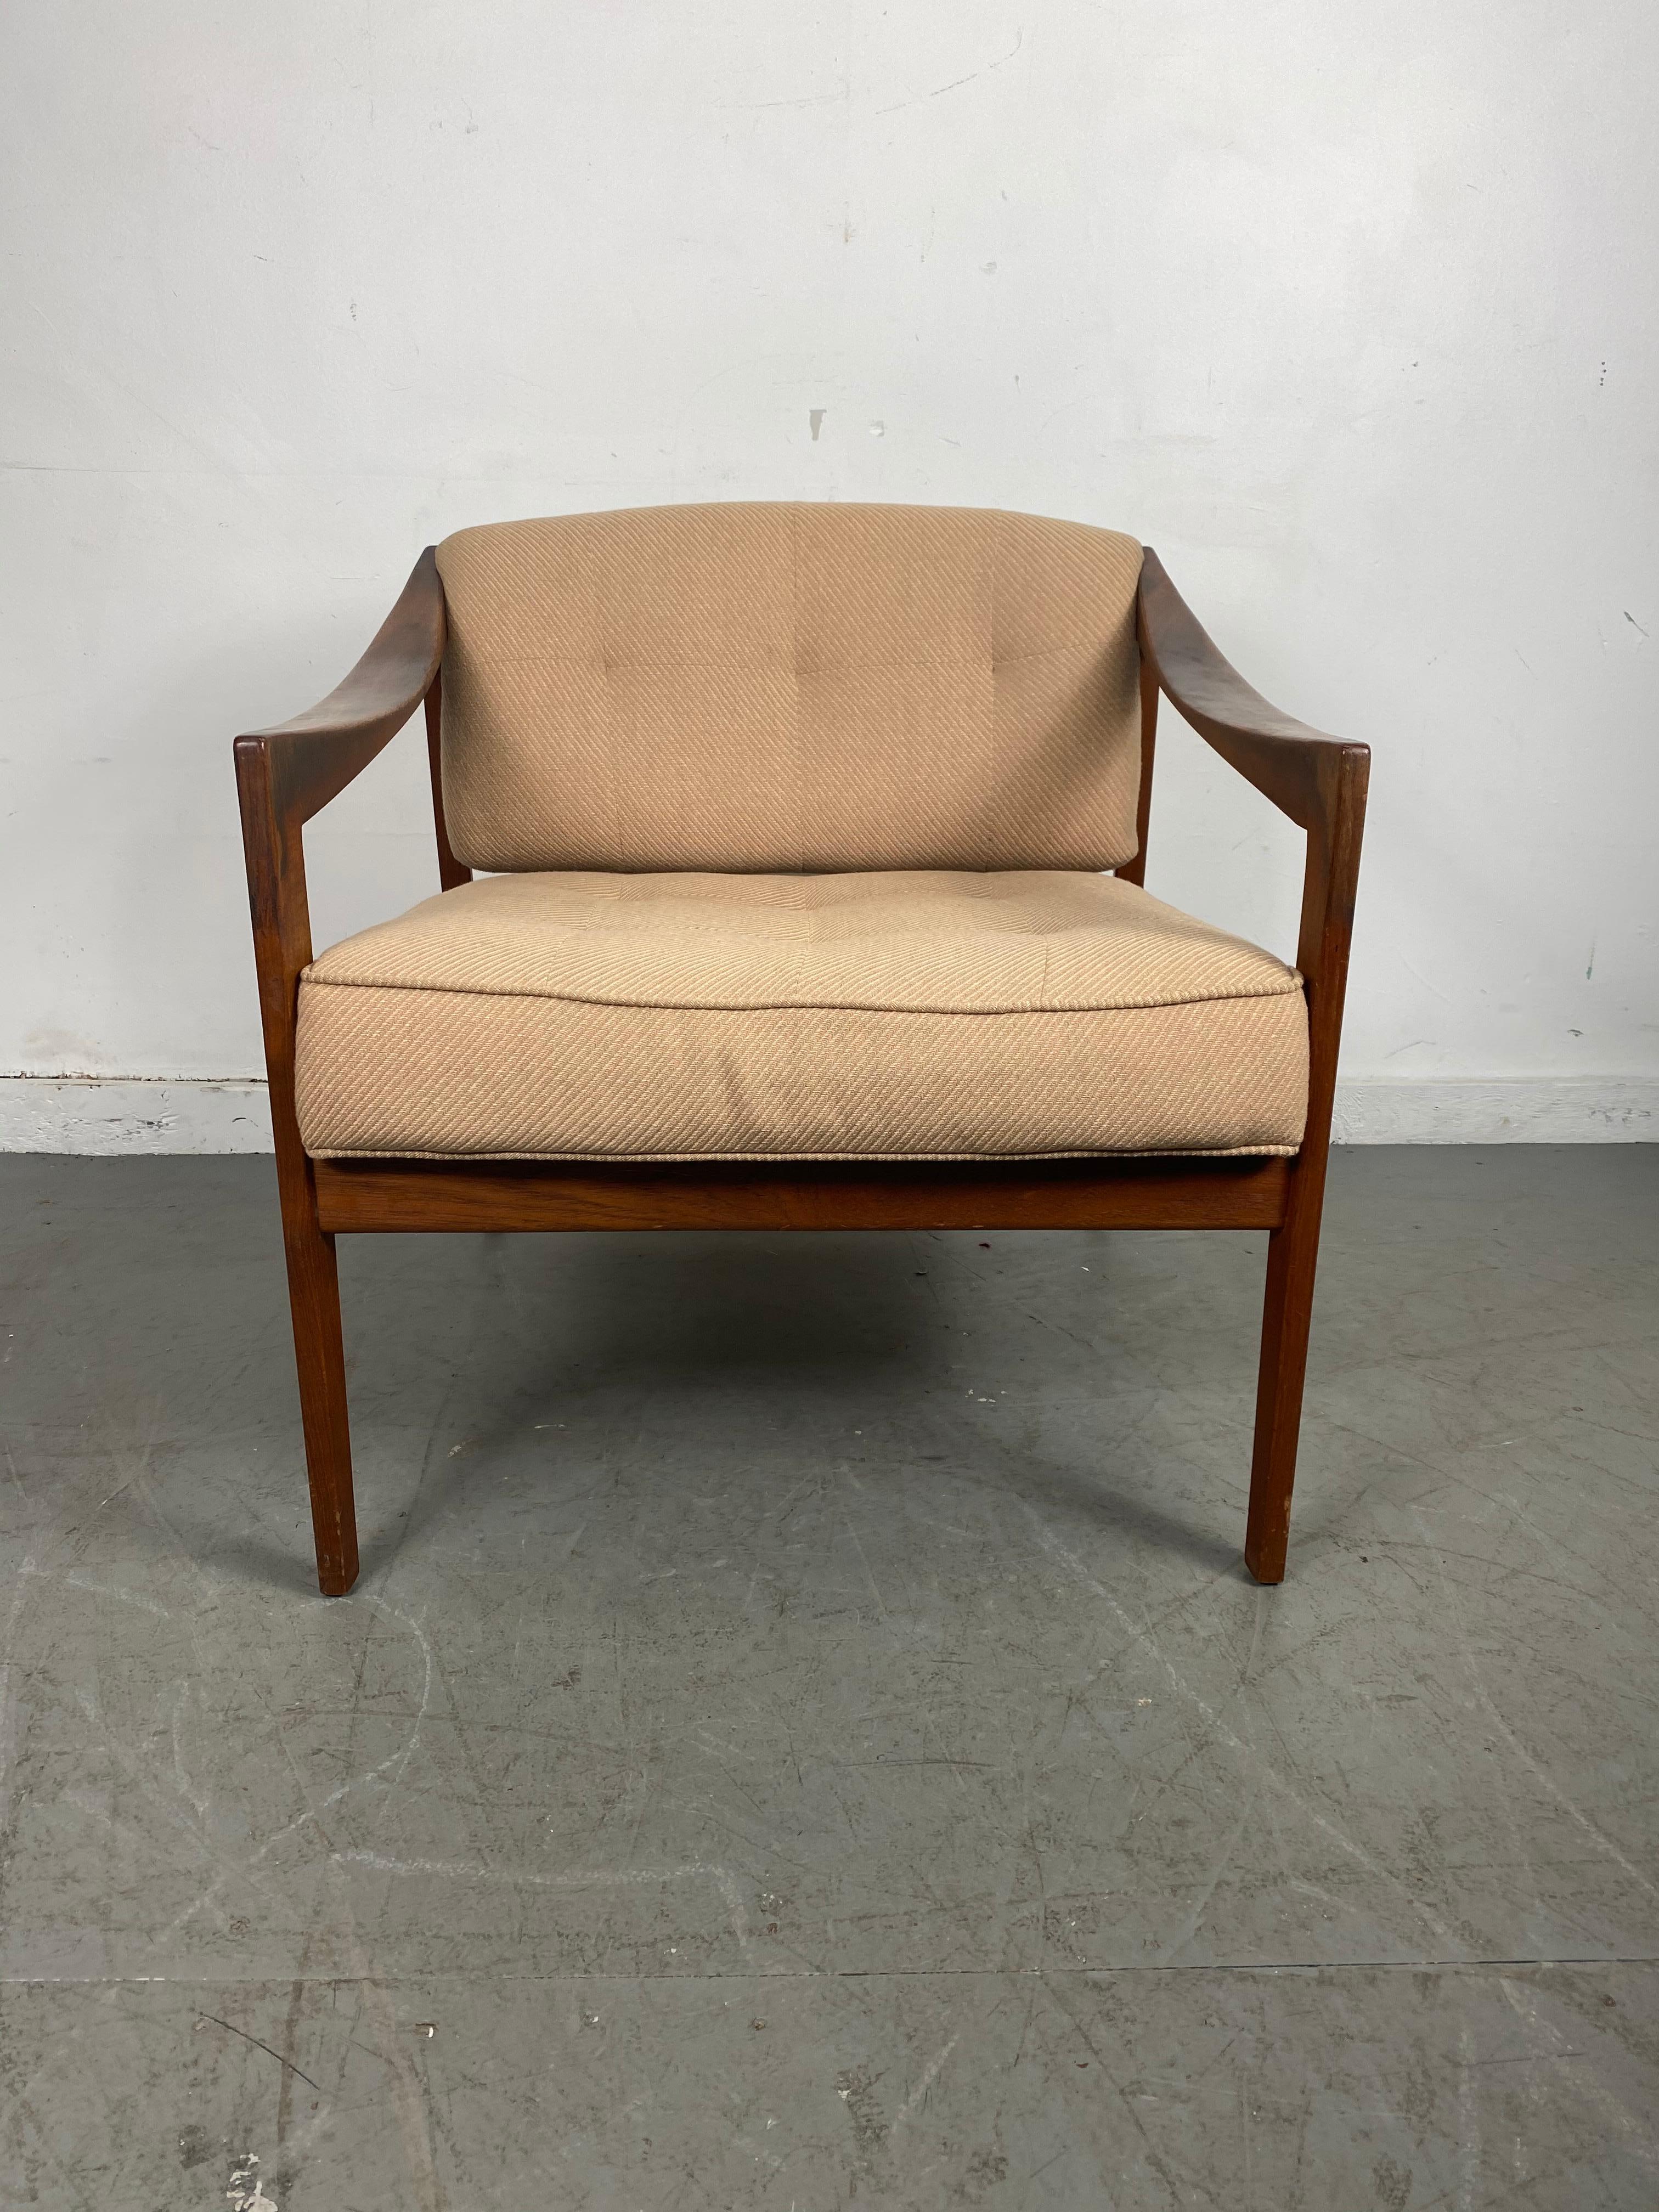 Classic Scandinavian Modern walnut lounge chair by DUX / Sweden, amazing sculptural walnut curved arms, superior quality and construction, retains original upholstery, nice original condition. Extremely comfortable.